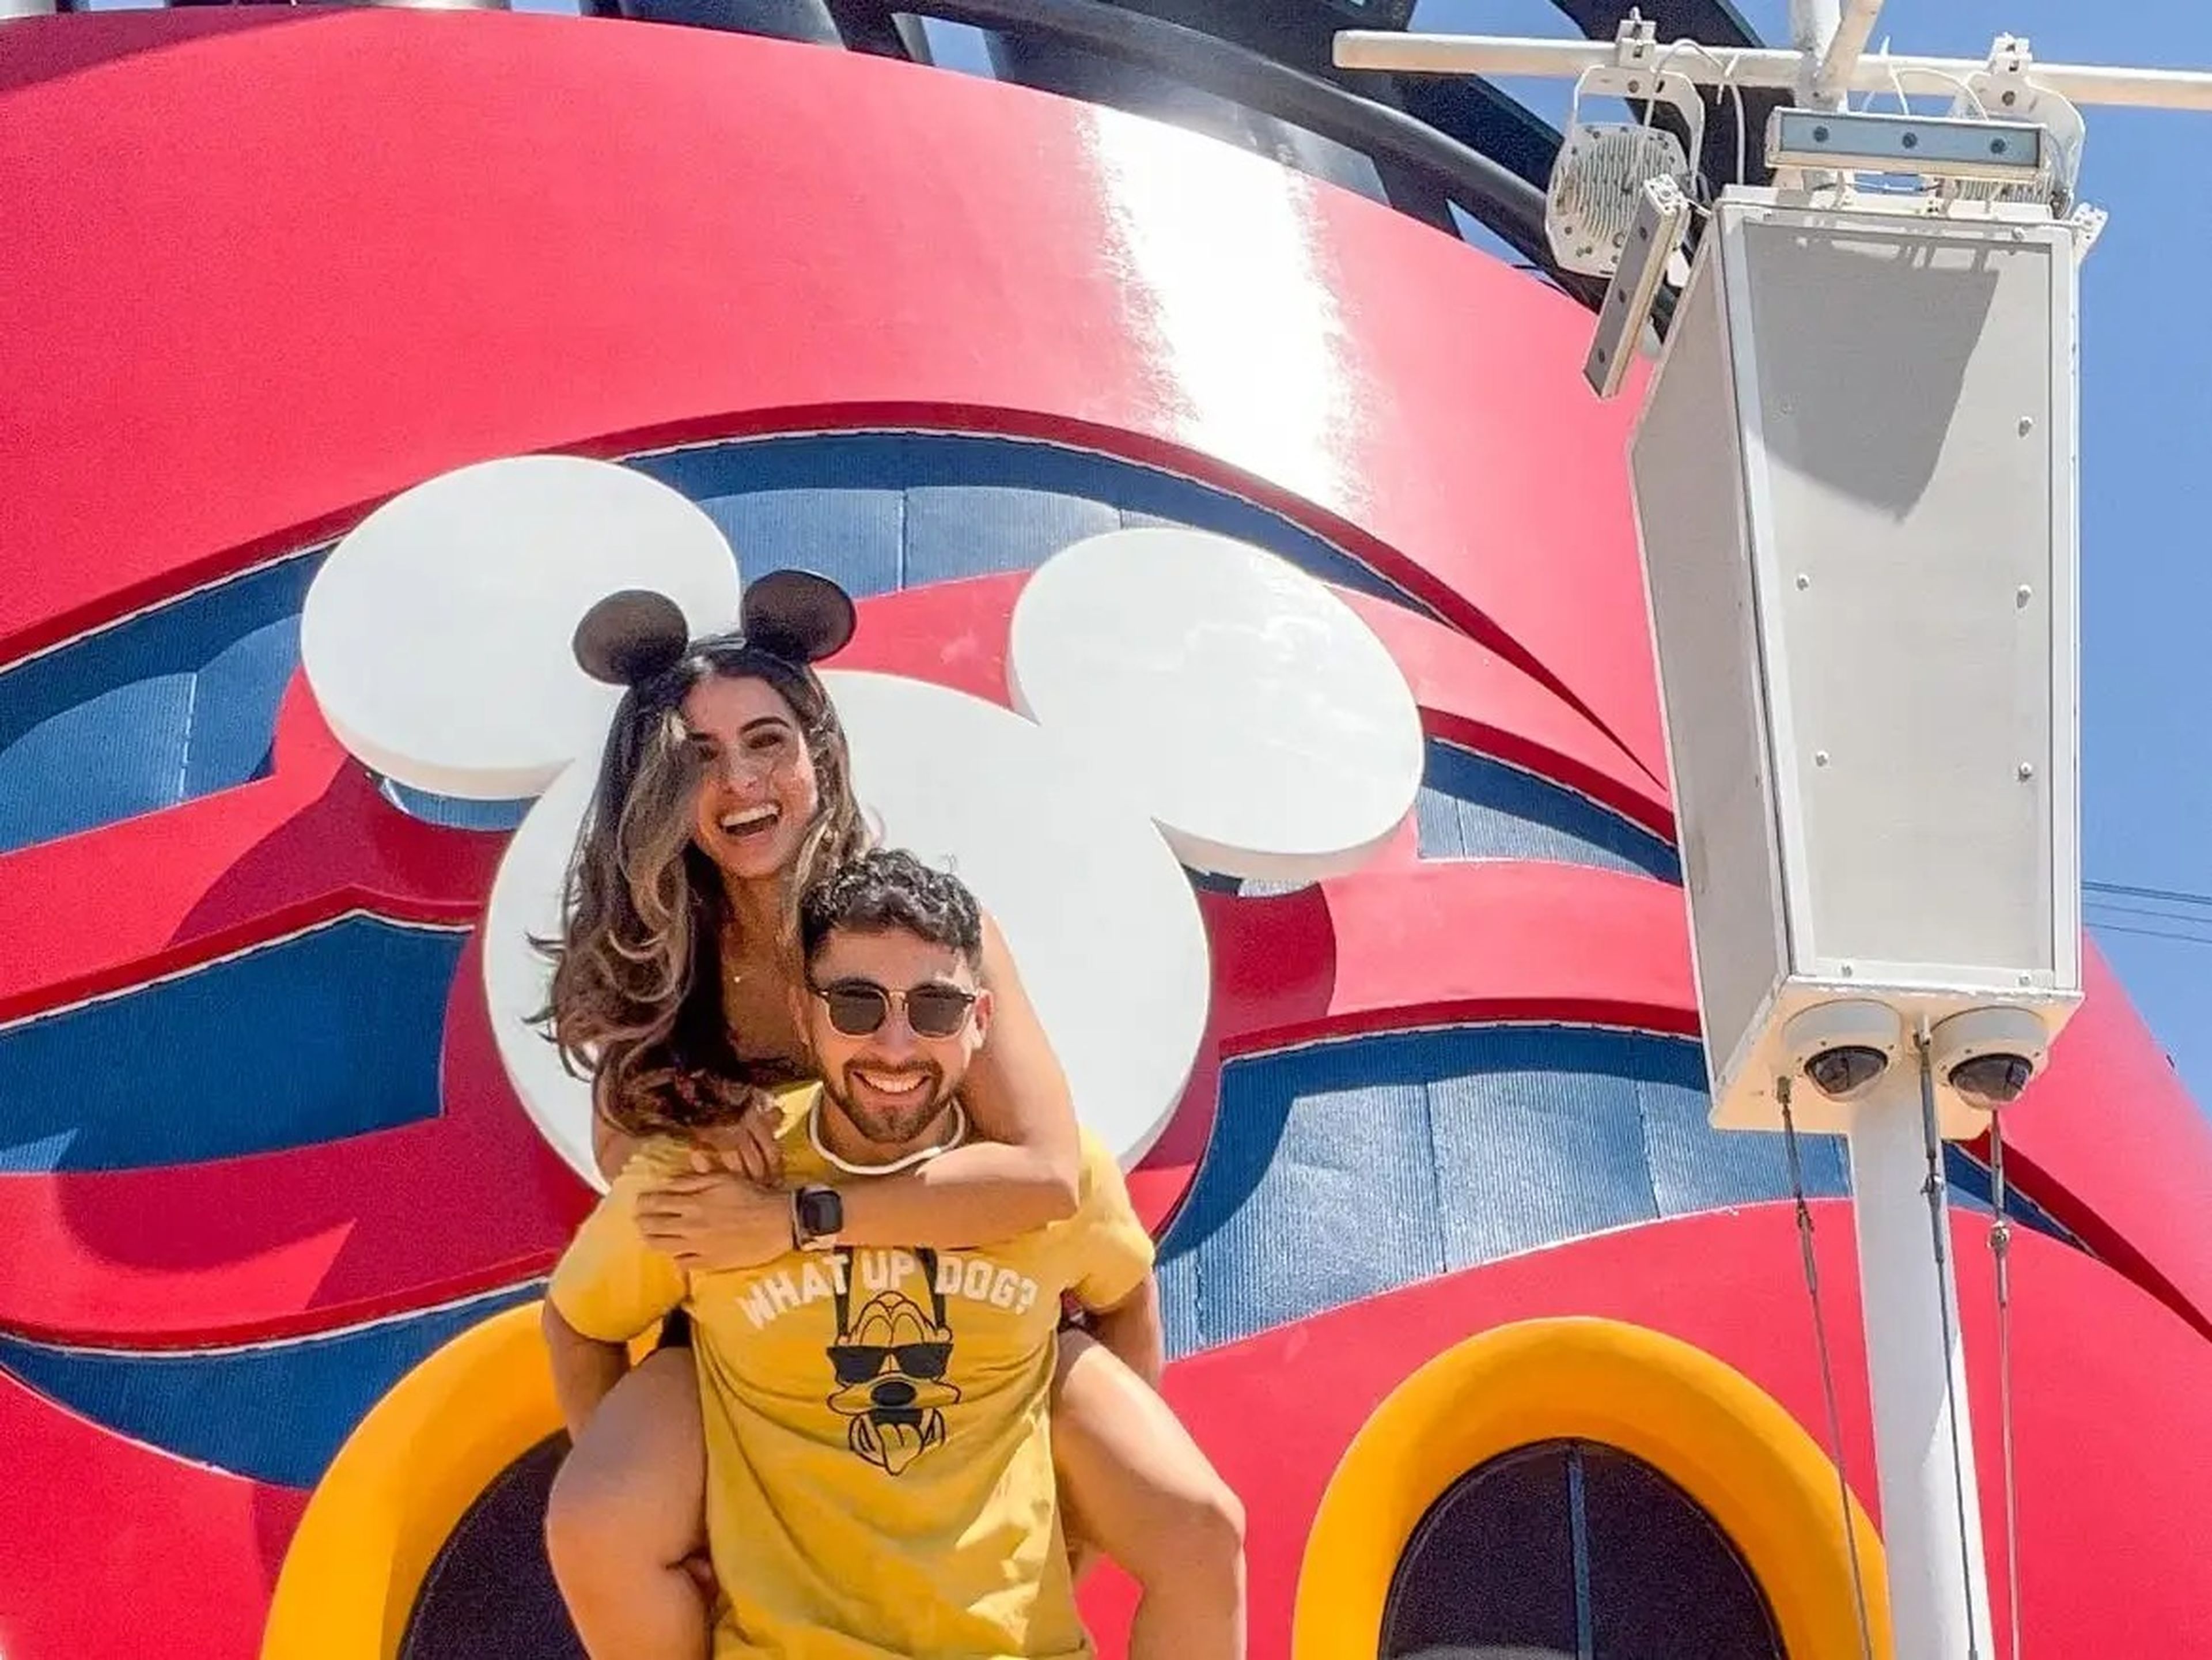 Nicole Cruz went on the Disney cruise for the first time details what her experience is like.